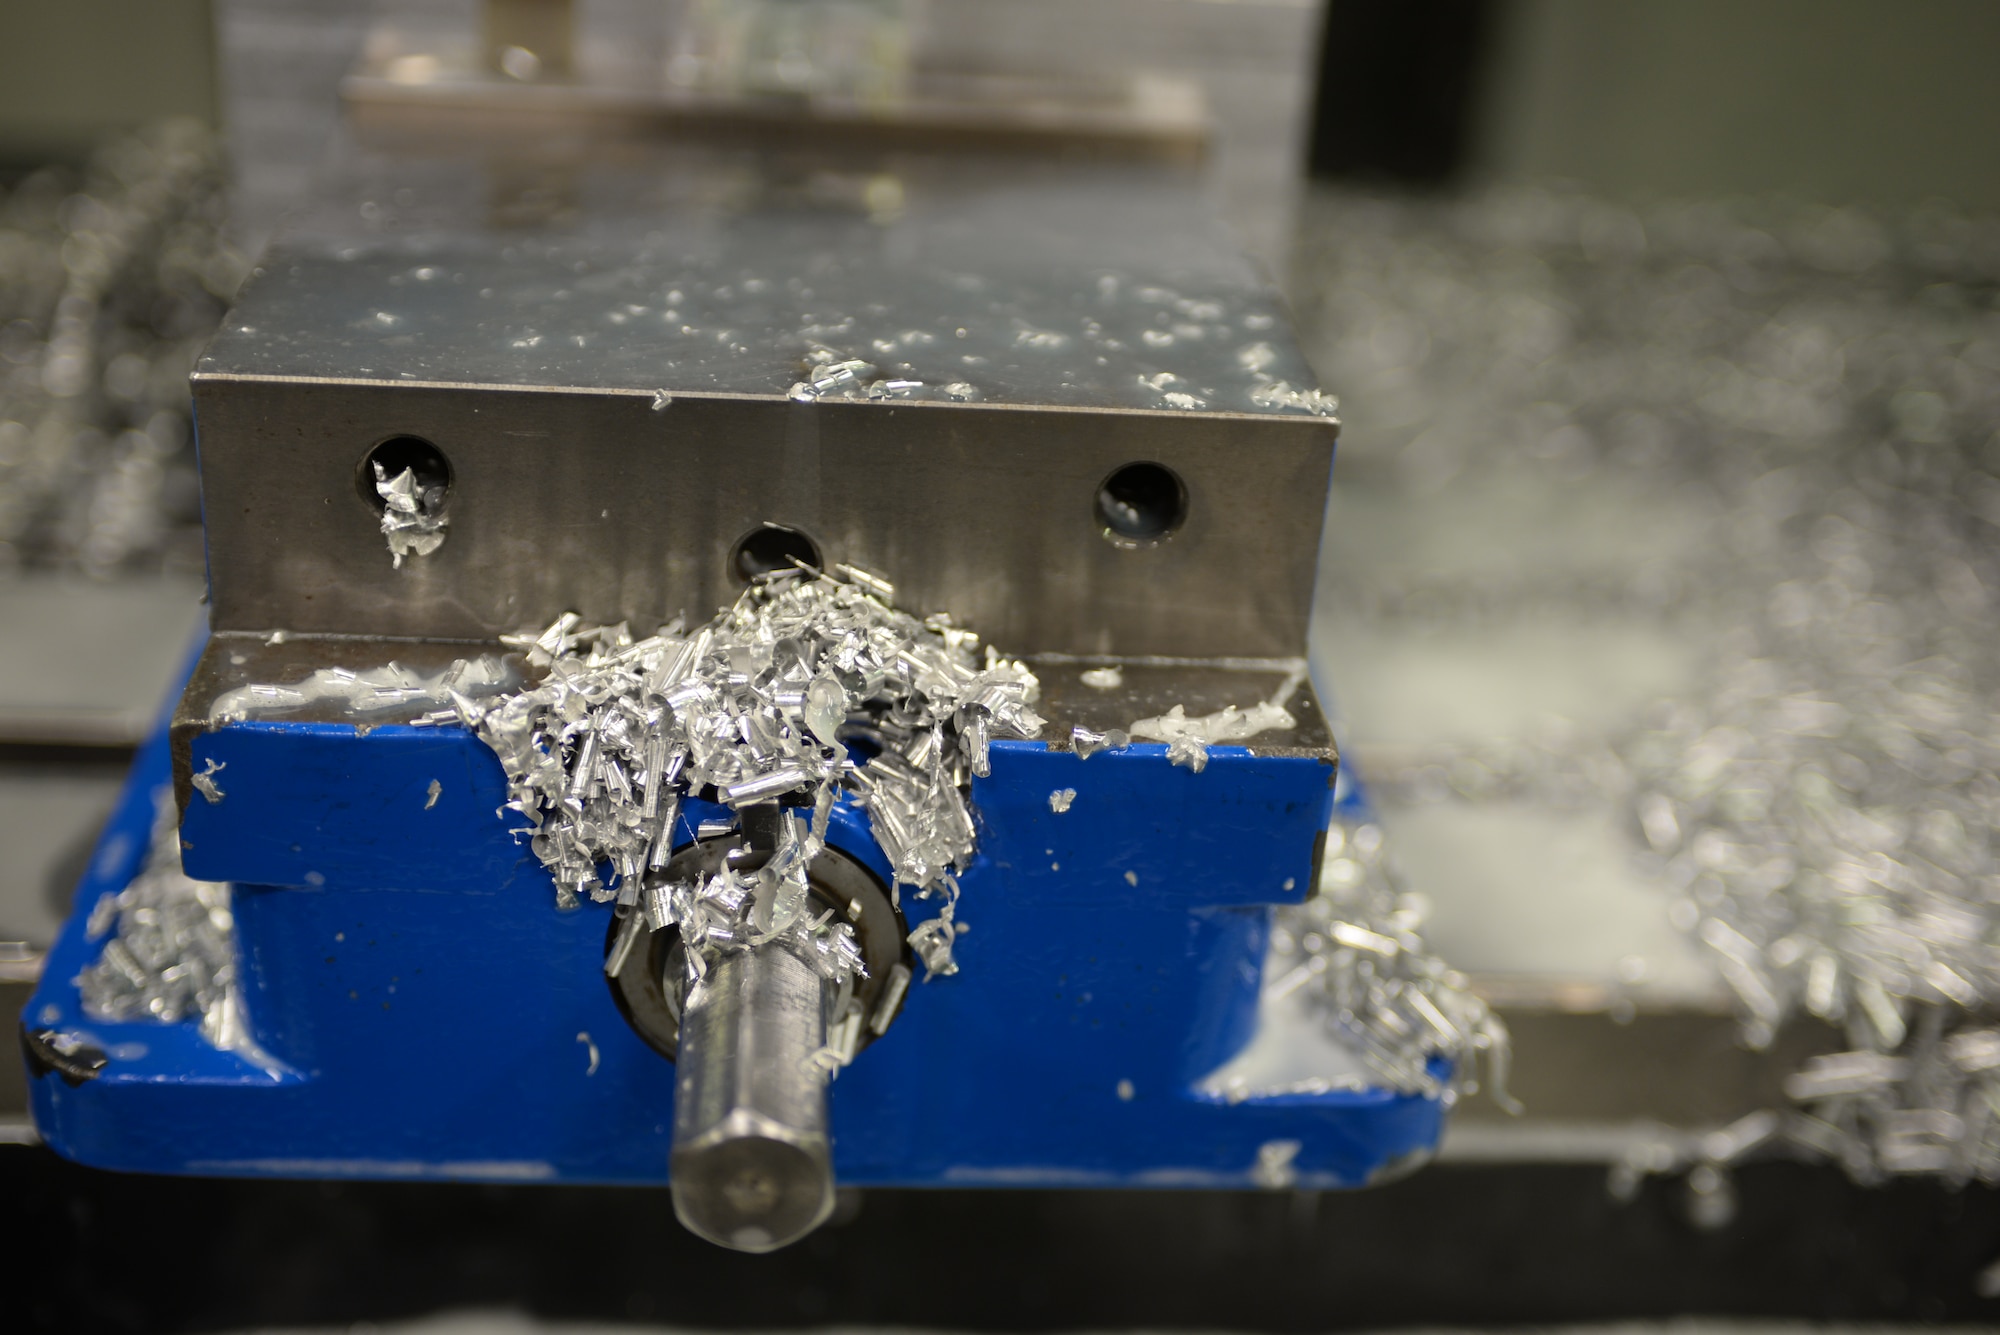 Chips from a metal block sit on a computer numerical control base at Ellsworth Air Force Base, S.D., Jan. 6, 2016. The 28th Maintenance Squadron metals flight creates parts like pulleys and over-wing fairing brackets; discarding excess materials like the chips into a bin for safety control. The flight creates aircraft parts that cannot be ordered through a supplies list. (U.S. Air Force photo by Airman Sadie Colbert/Released)